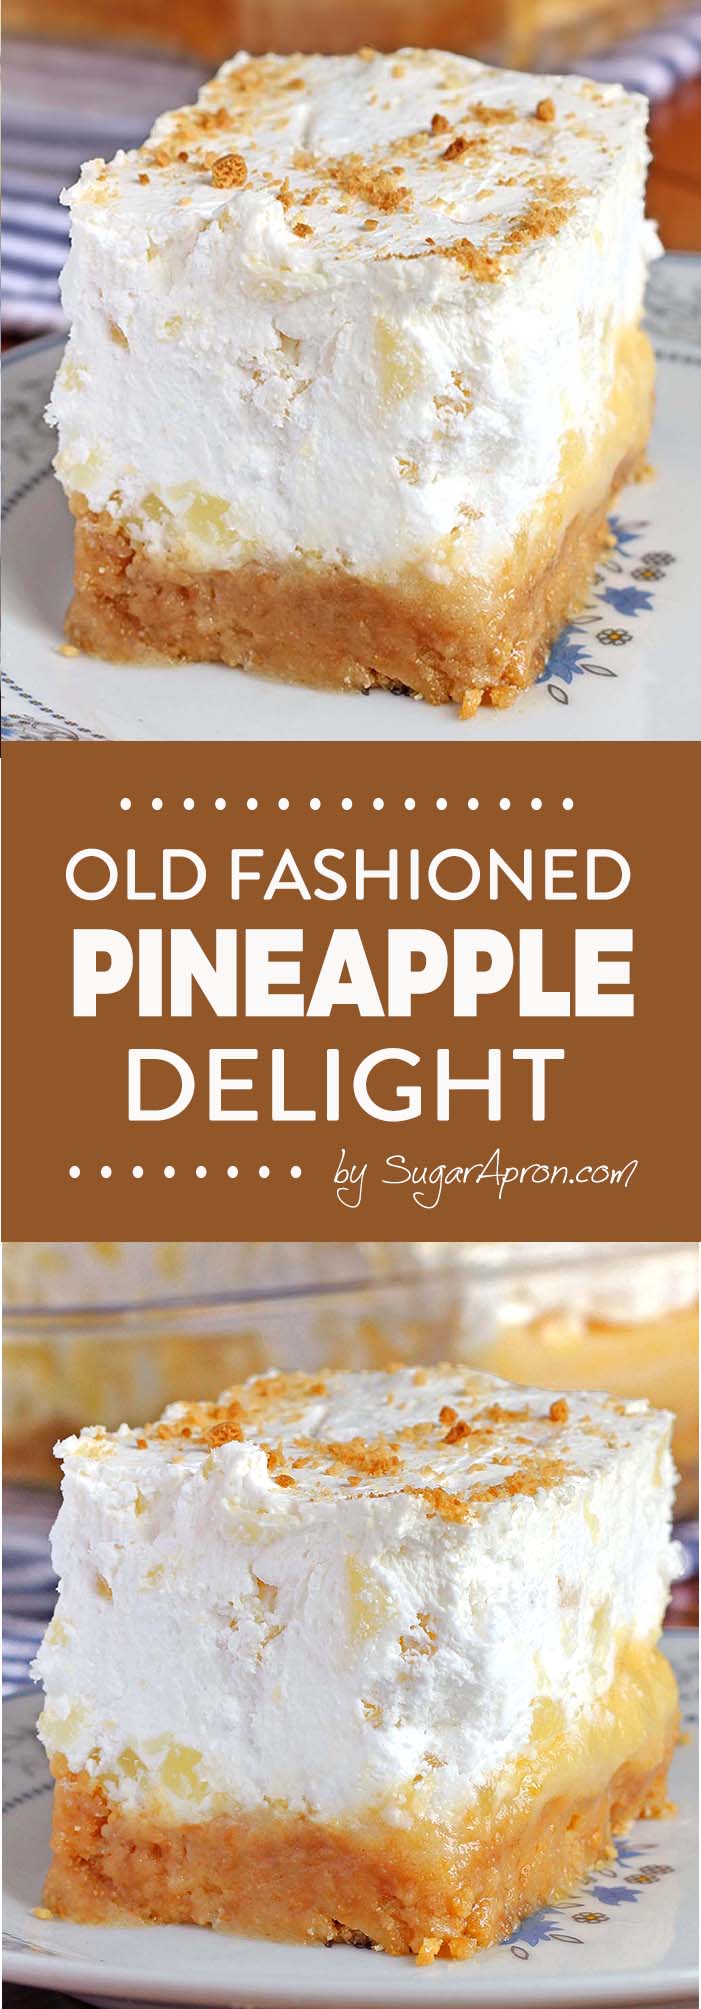 Are you looking for the perfect dessert for a summer family reunion or pot luck ? This Pineapple Delight Dessert is so easy to make and feeds a crowd.